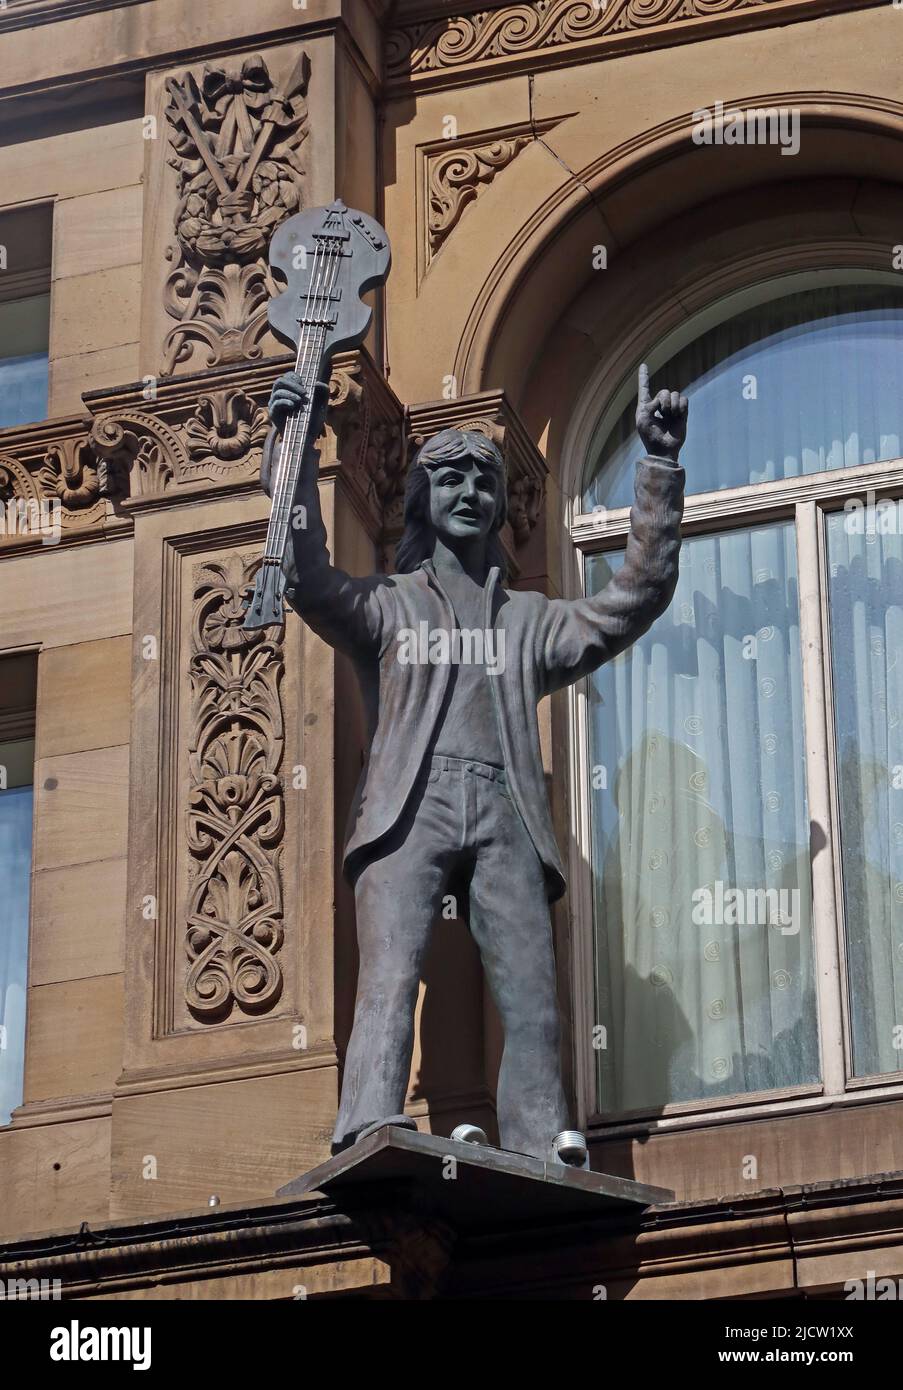 Paul McCartney - The Liverpool Beatle statues - The Fab Four, around outside of Hard Day's Night Hotel, Central Buildings, N John St, Liverpool L2 6RR Stock Photo